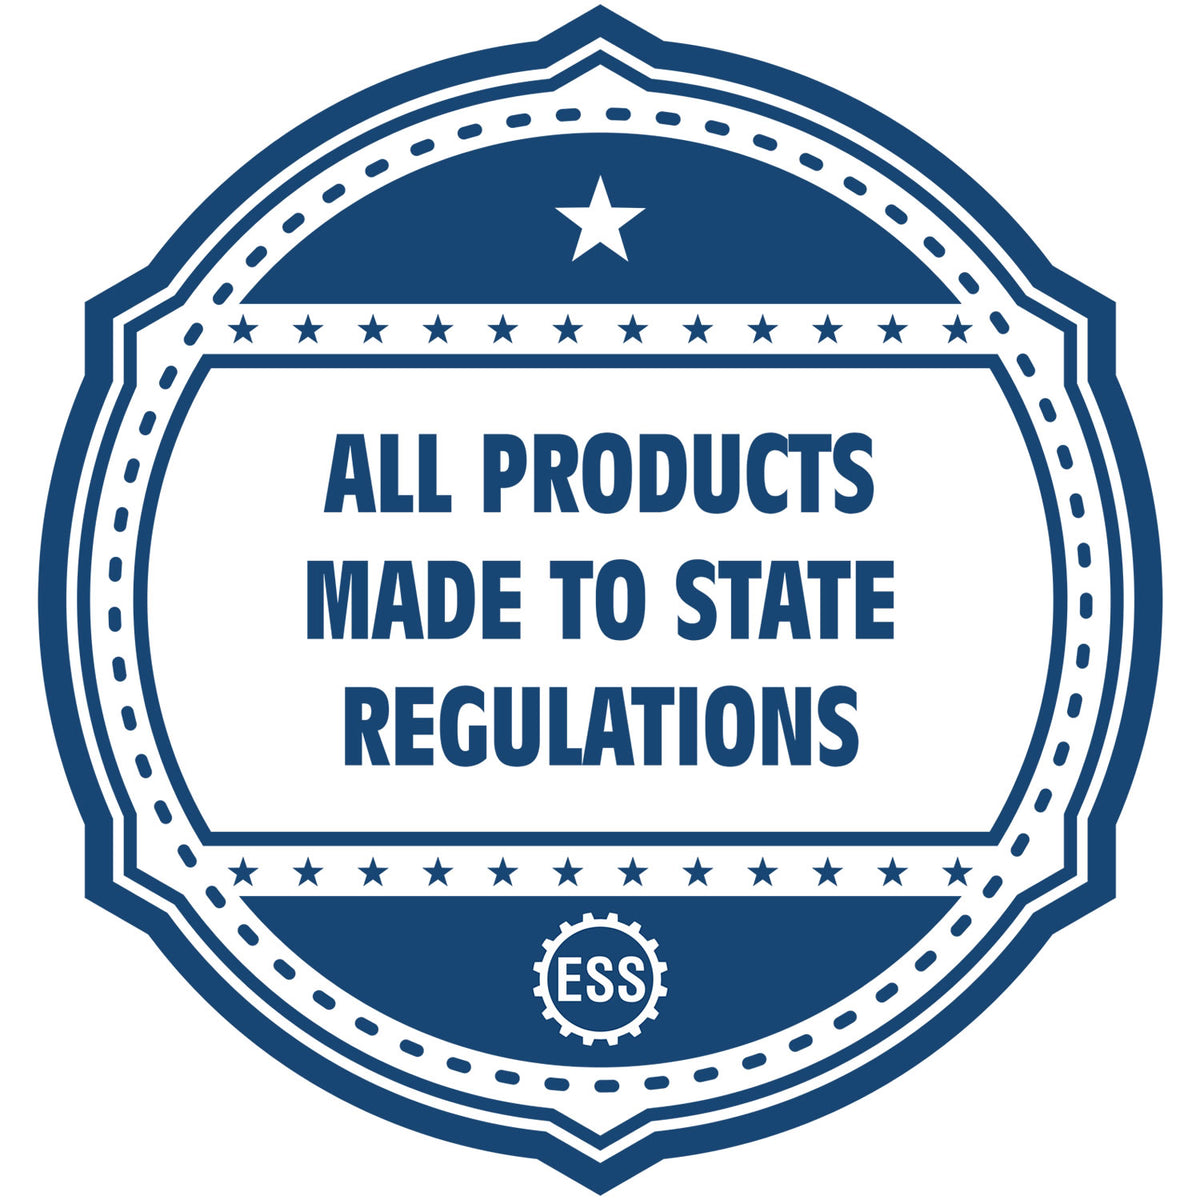 An icon or badge element for the Handheld New Mexico Architect Seal Embosser showing that this product is made in compliance with state regulations.